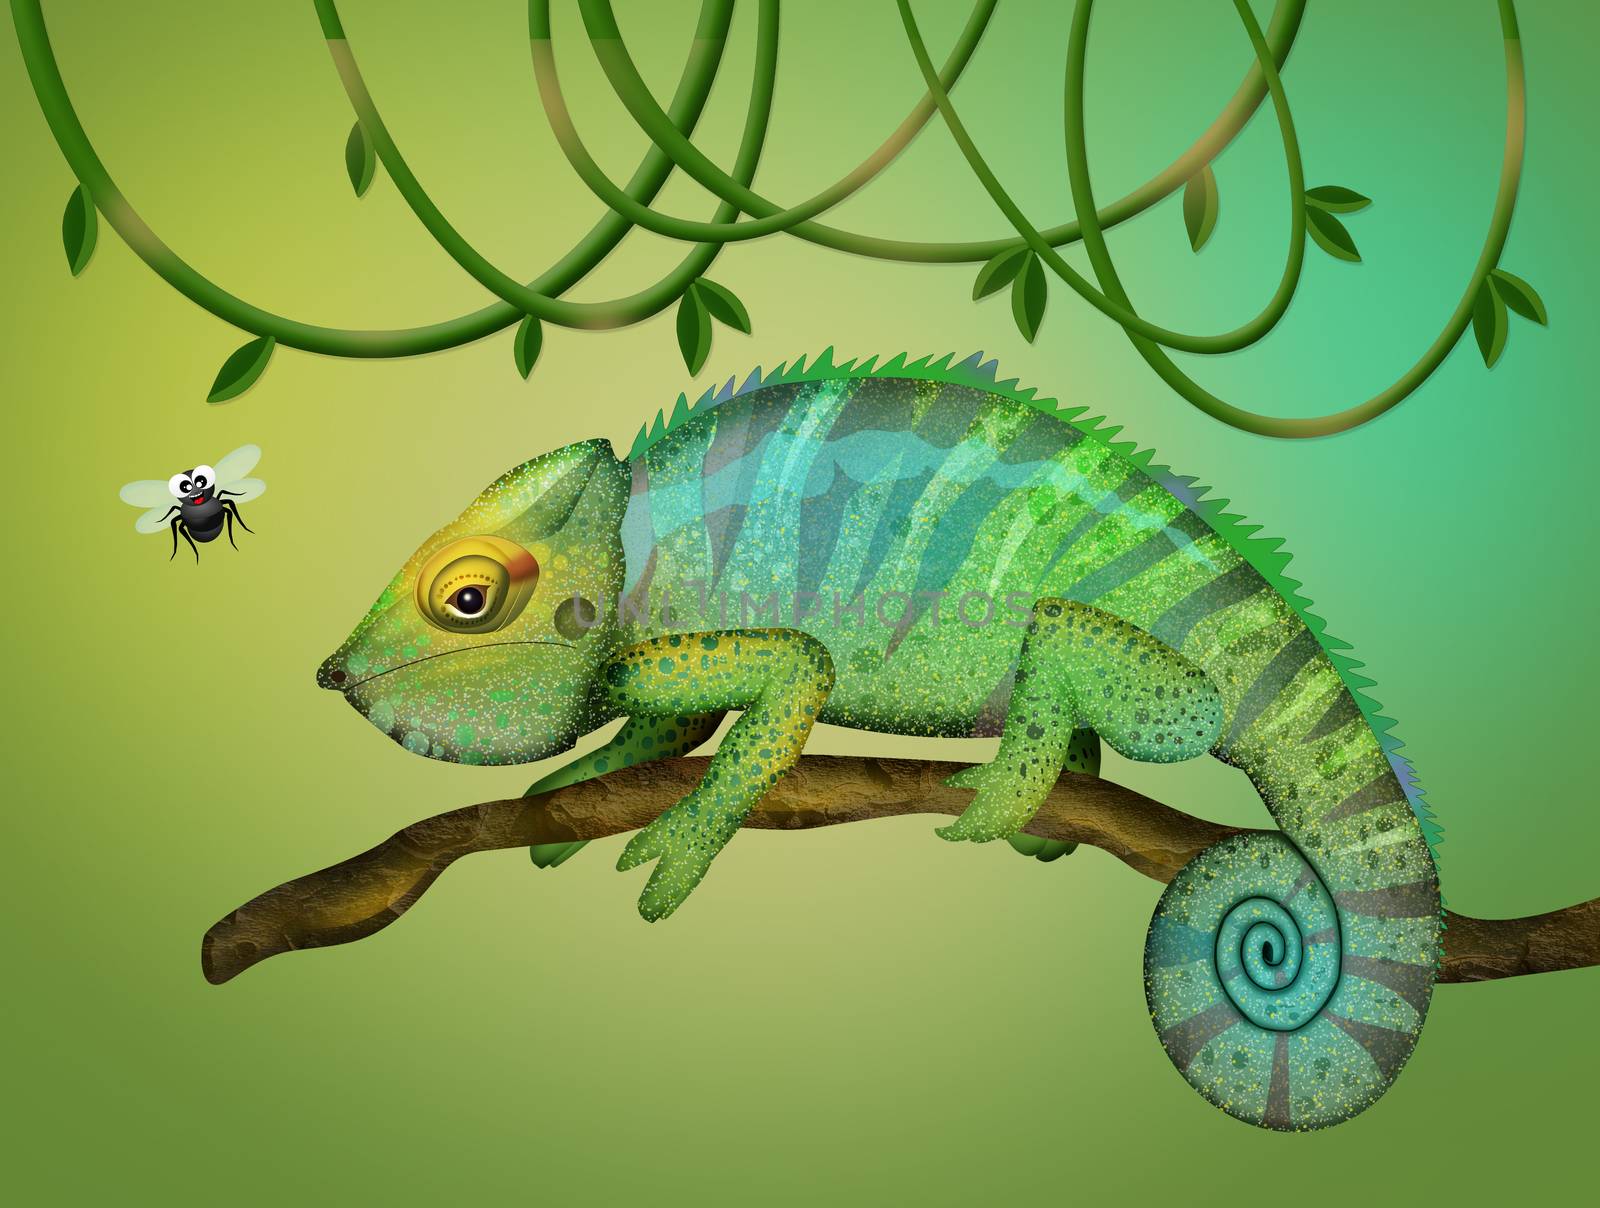 chameleon and flies by adrenalina